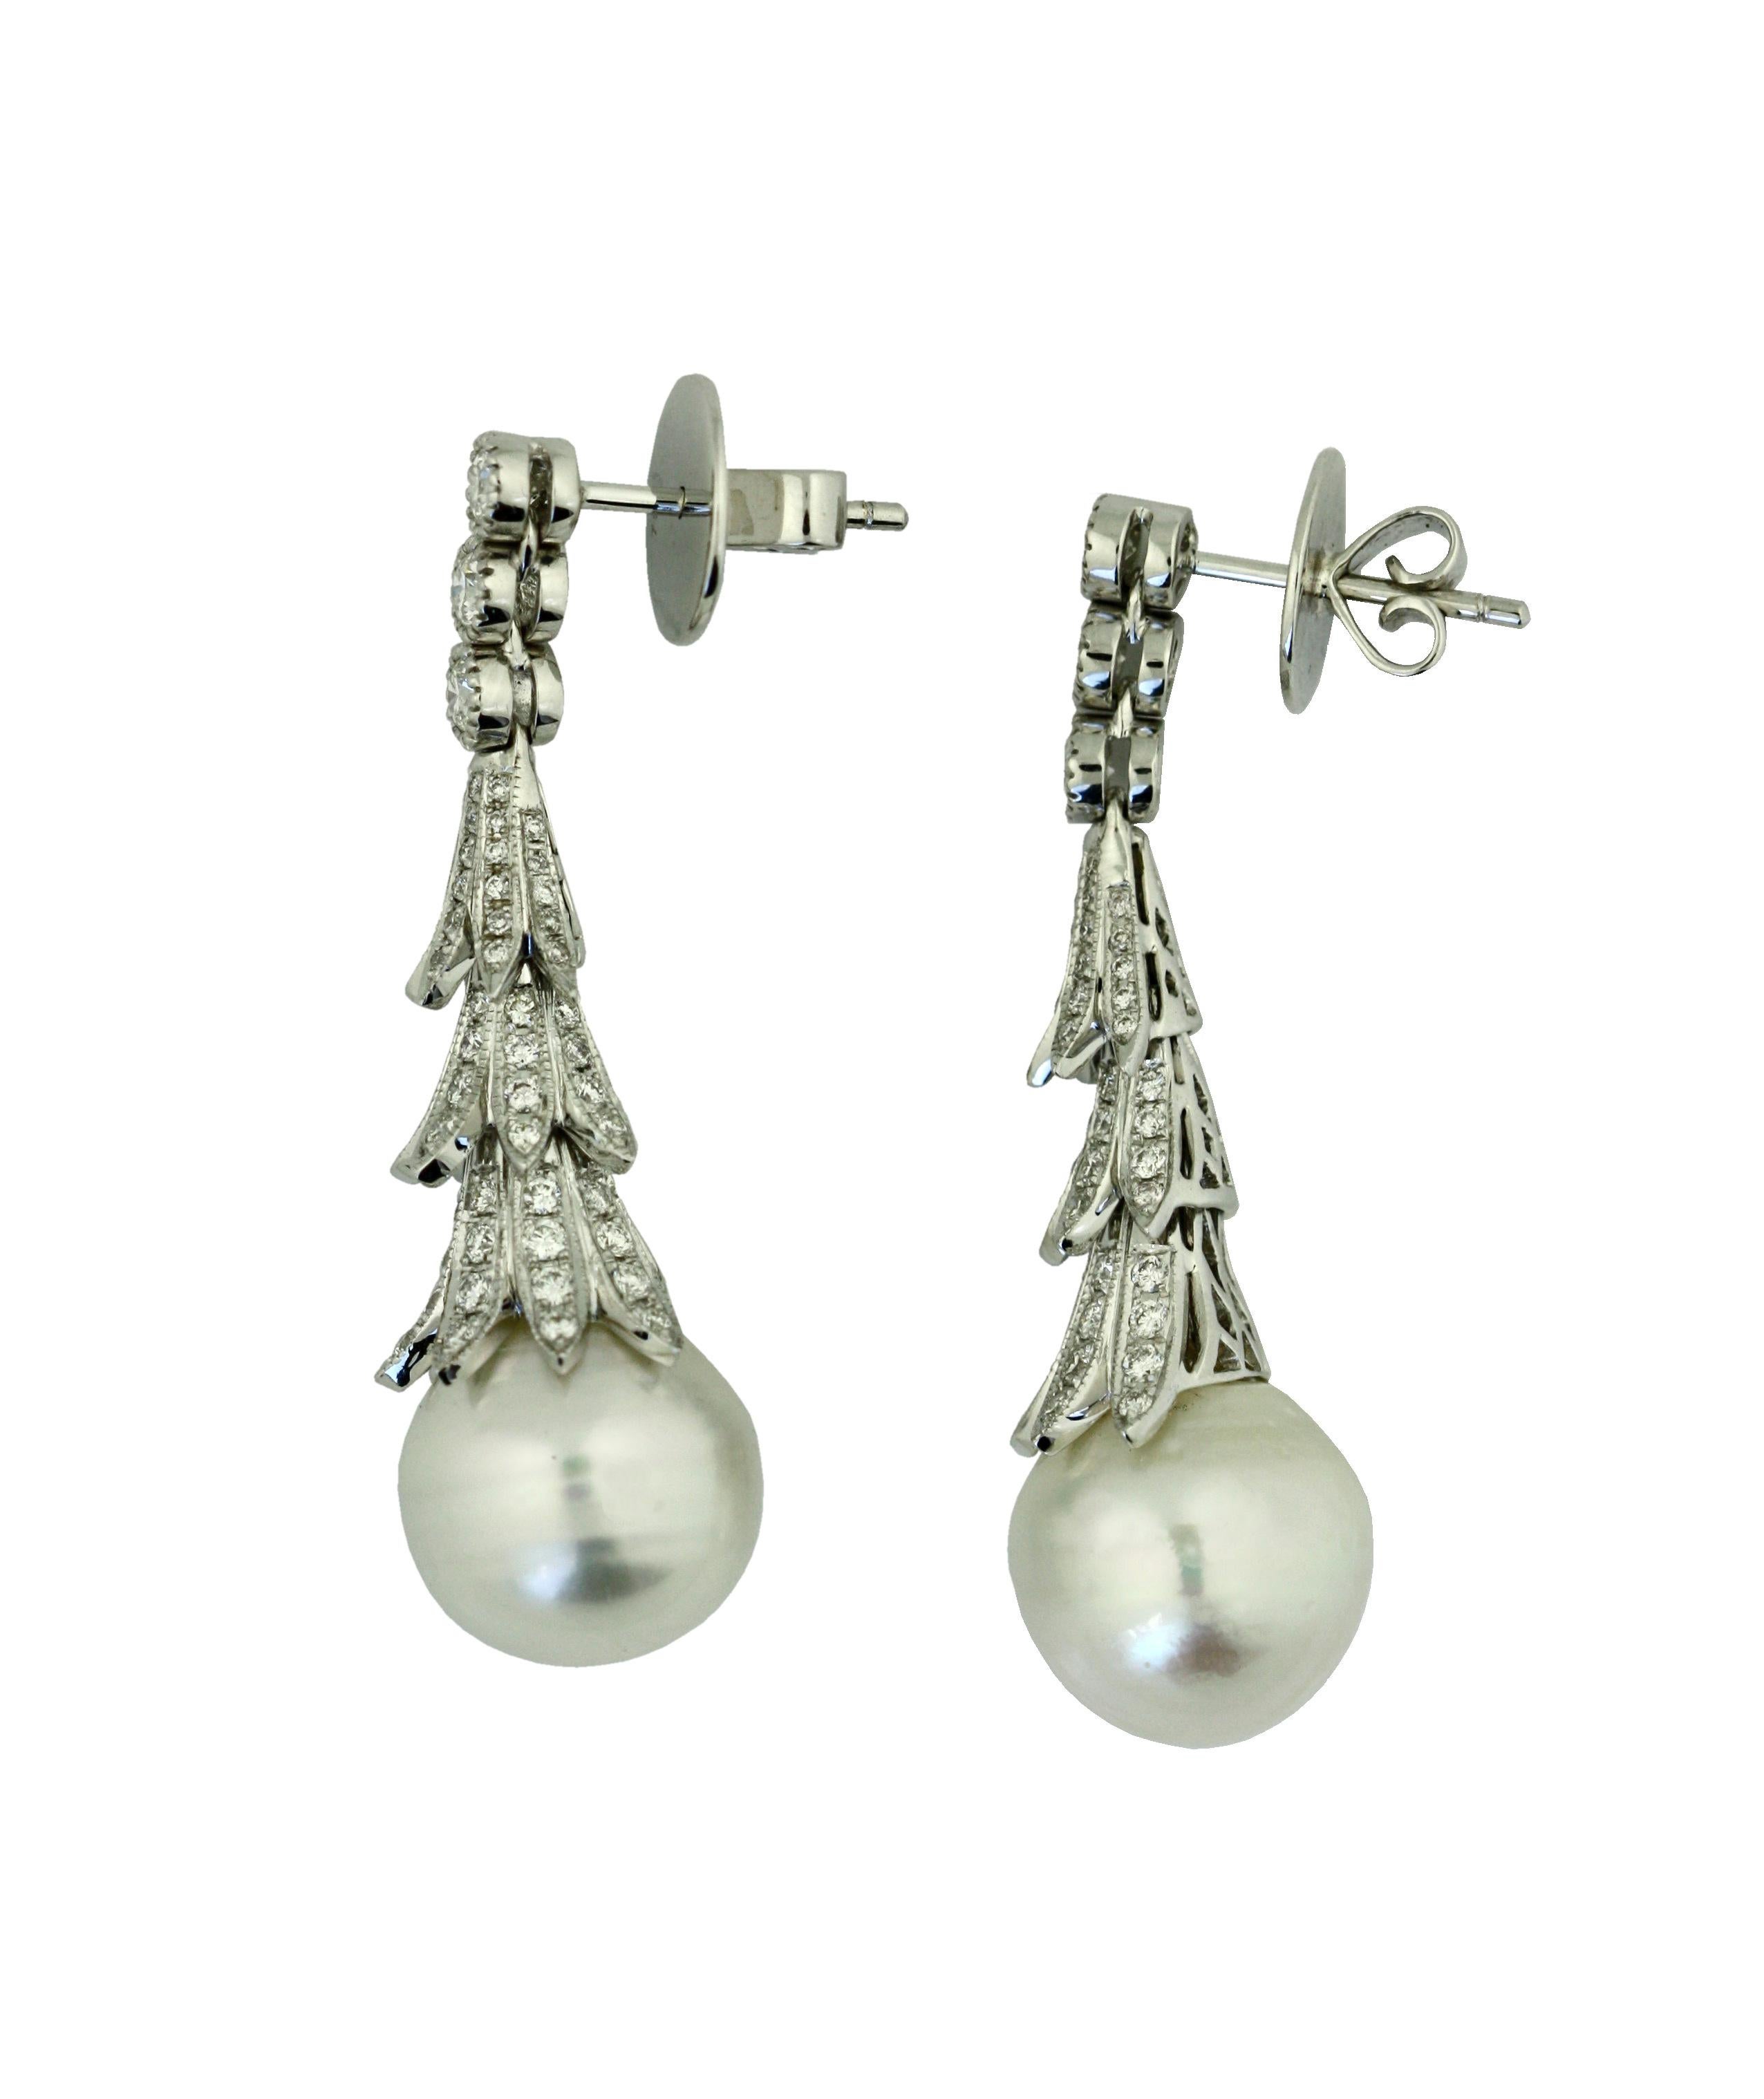 18KT WHITE GOLD, DIAMOND AND SOUTH SEA PEARL EARRINGS
pearls approx. 12.5mm, diamonds weighing approximately 3.25 carats